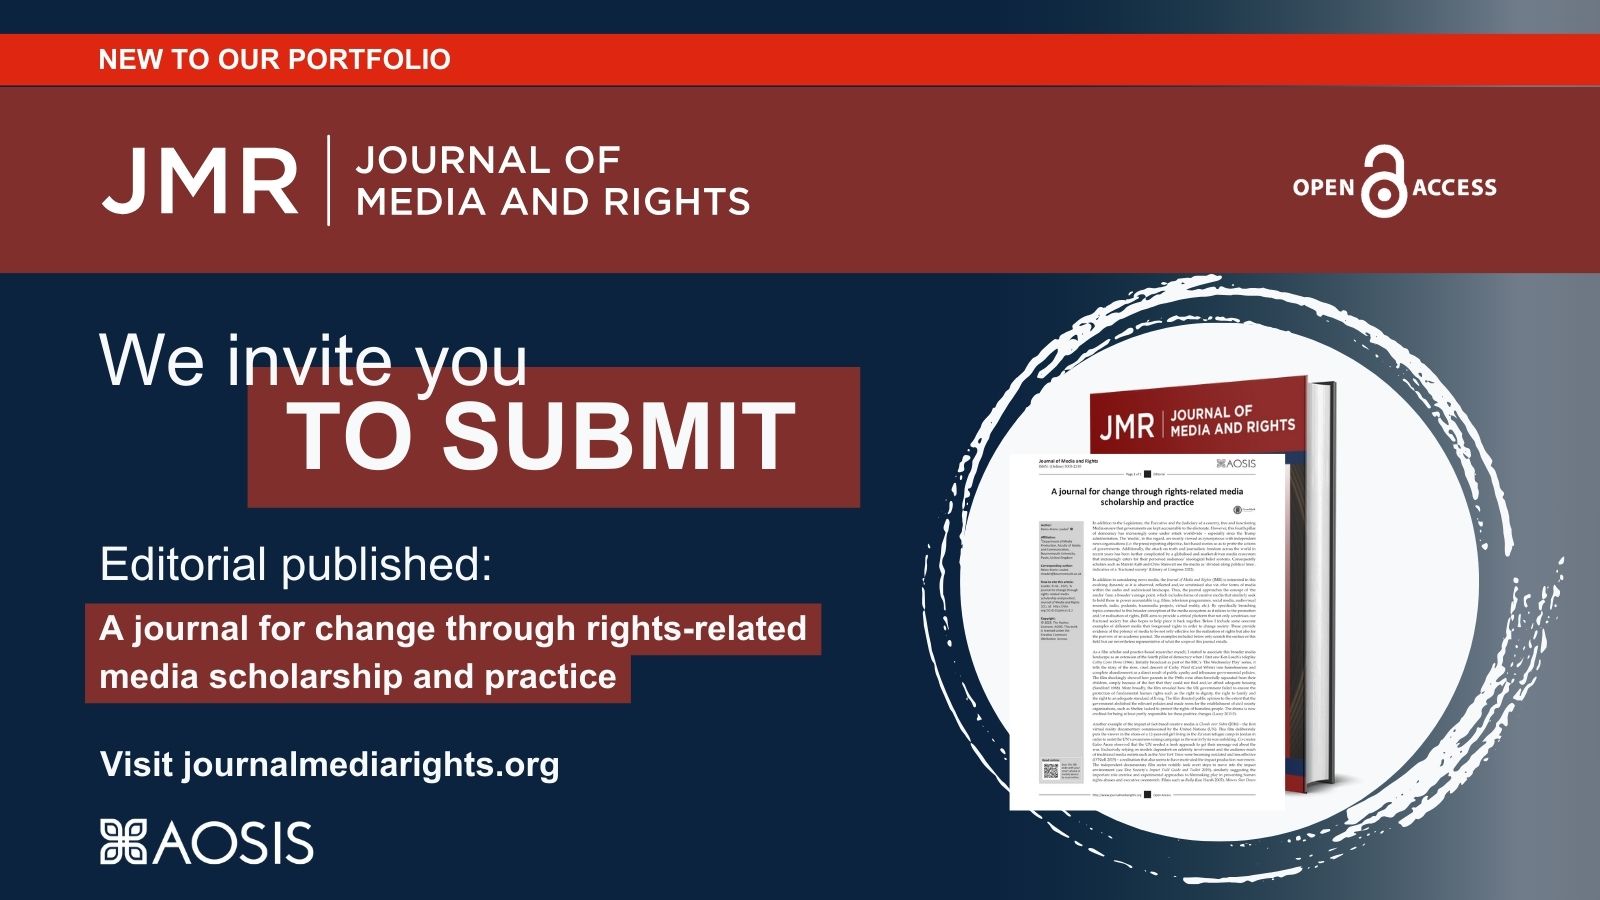 The Journal of Media and Rights has published its inaugural editorial